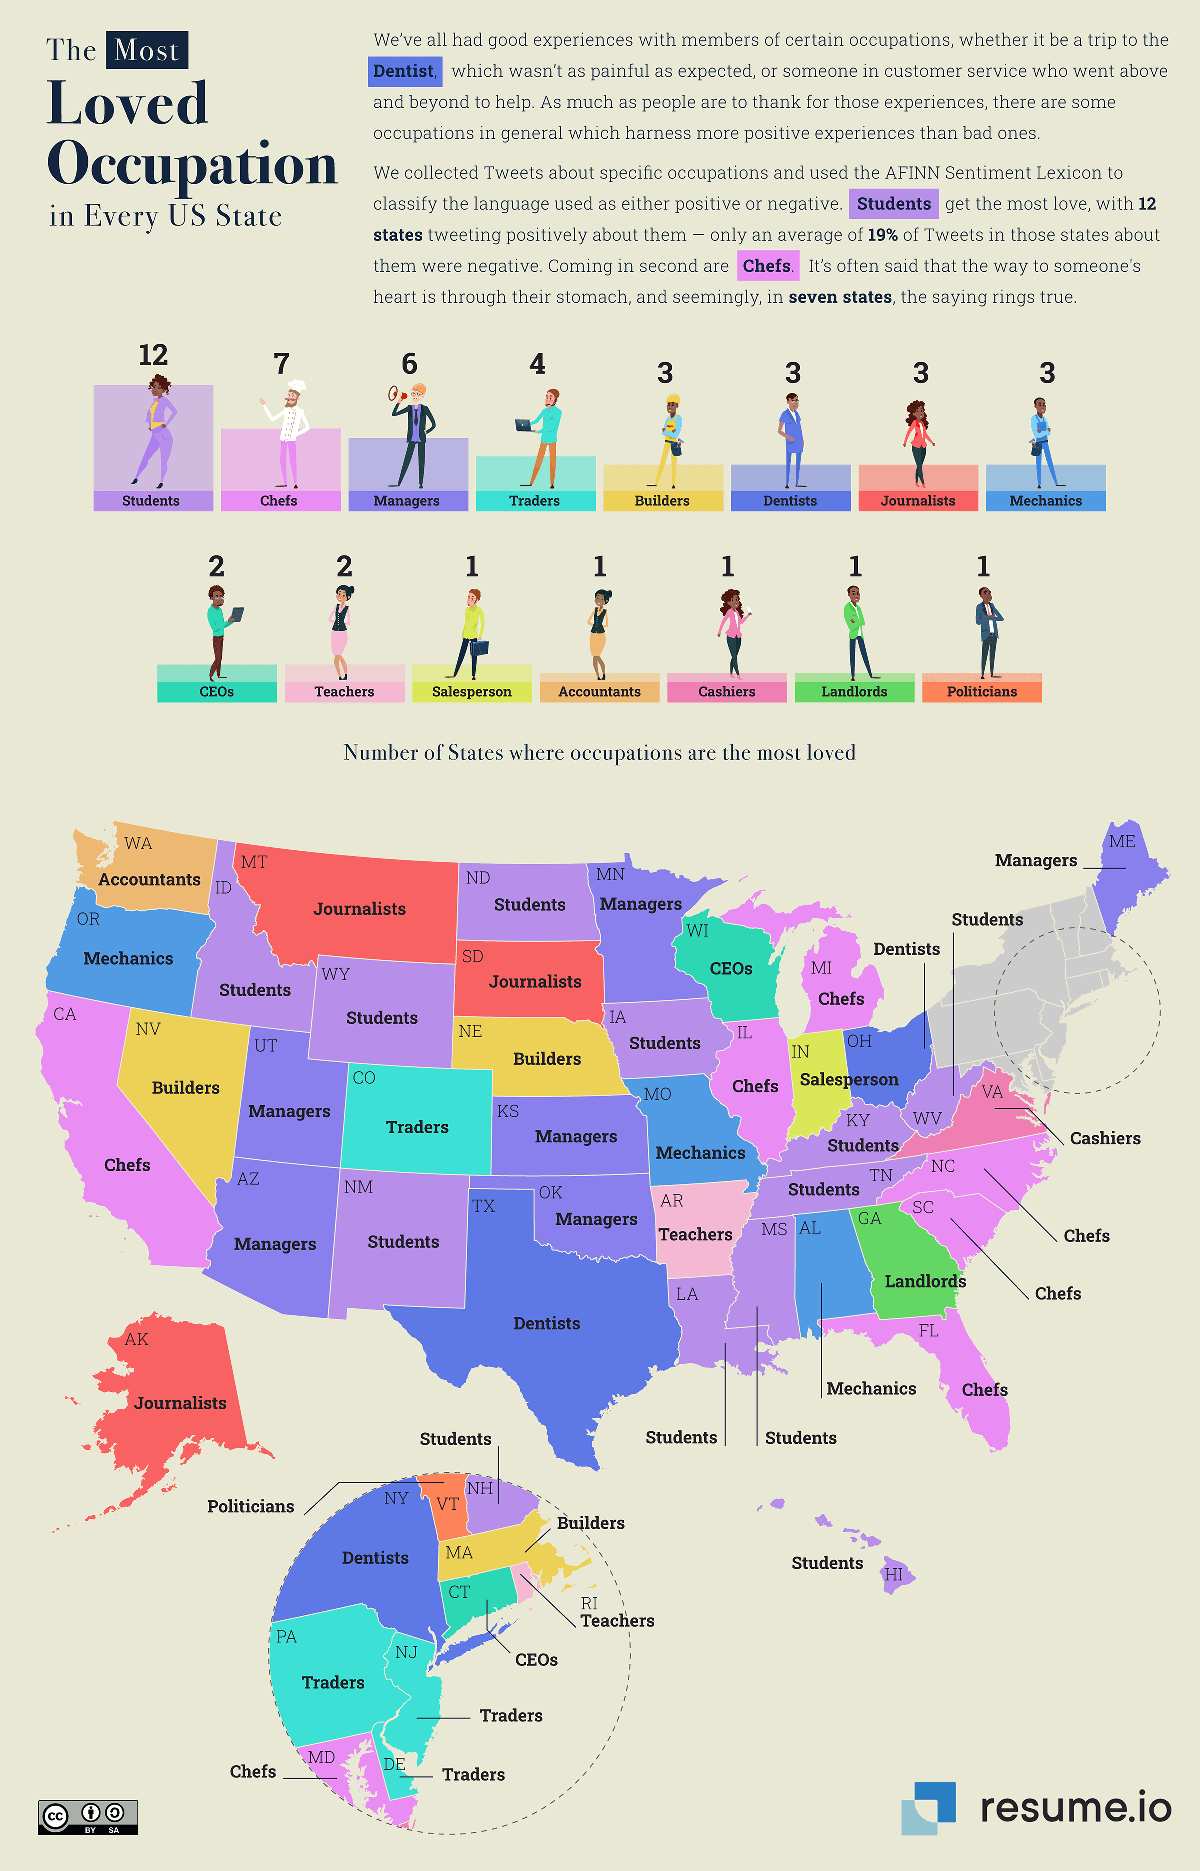 The most loved occupation in every US states.